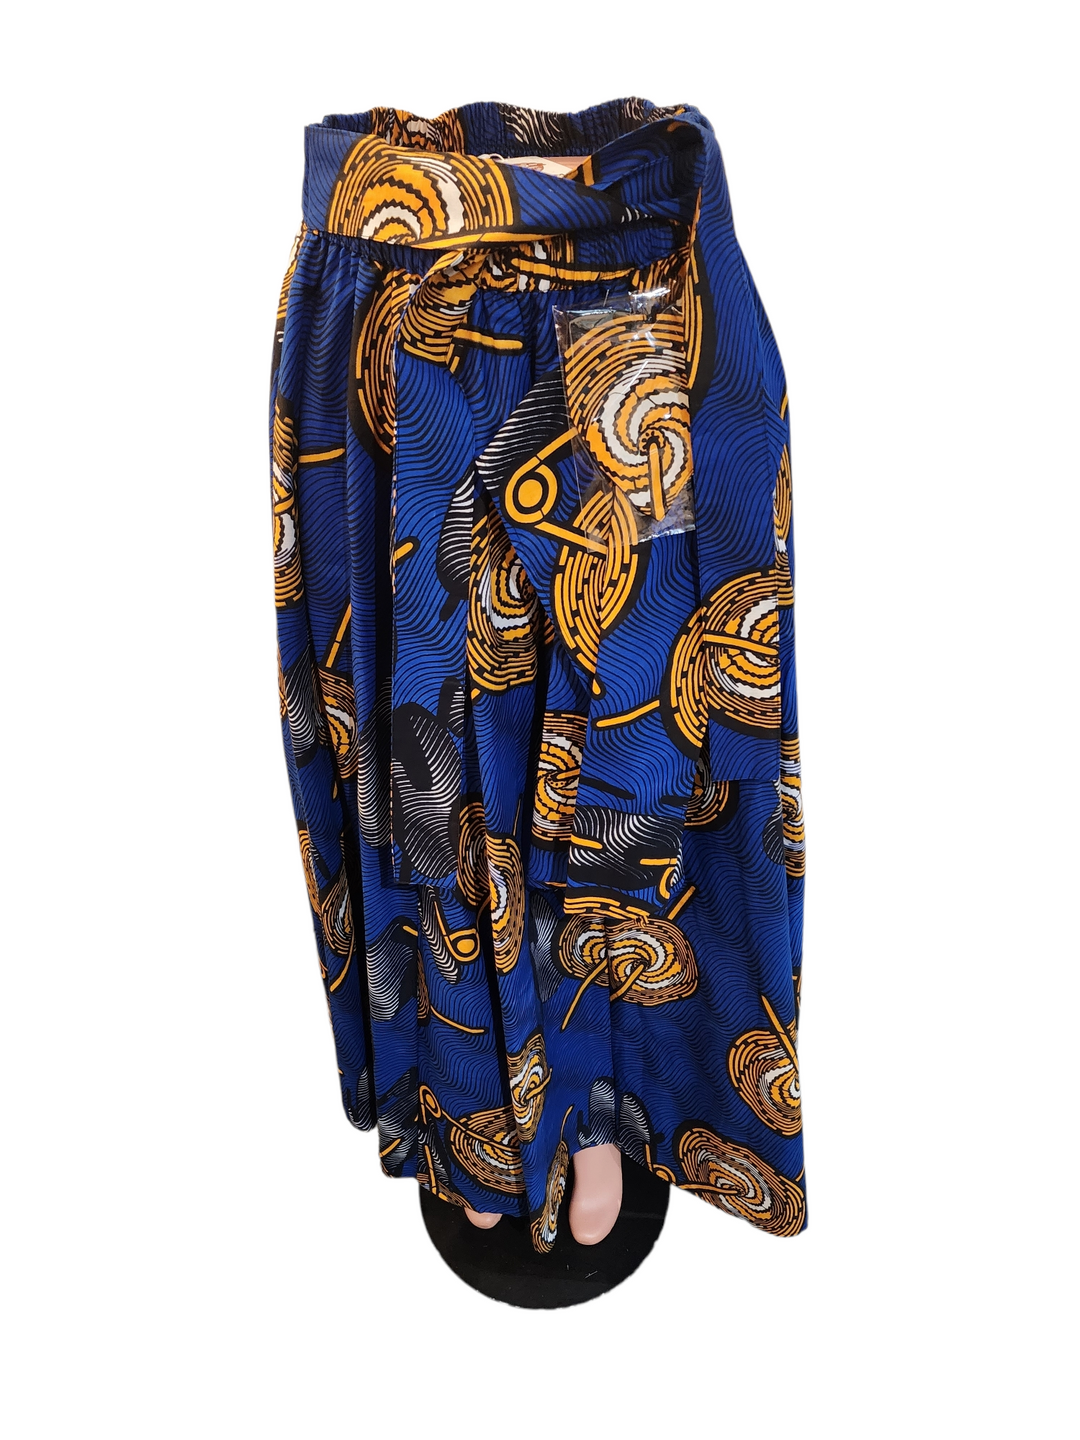 Ladies African Multi-print long skirt with side pockets and scarf